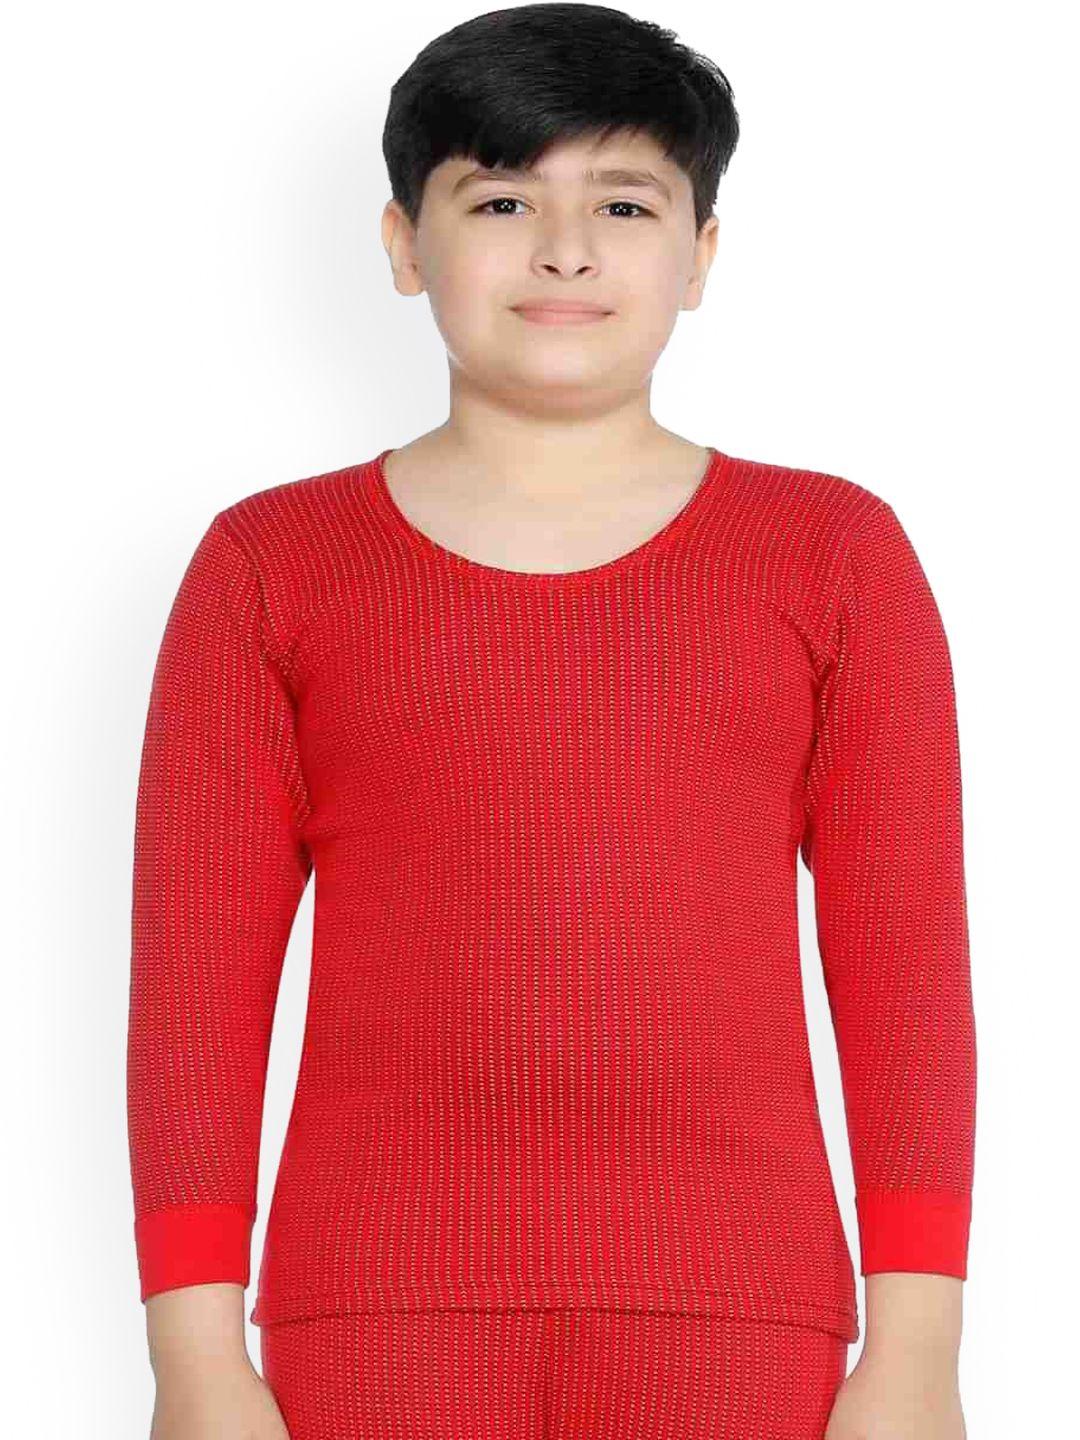 bodycare-kids-boys-red-solid-cotton-round-neck-thermal-tops